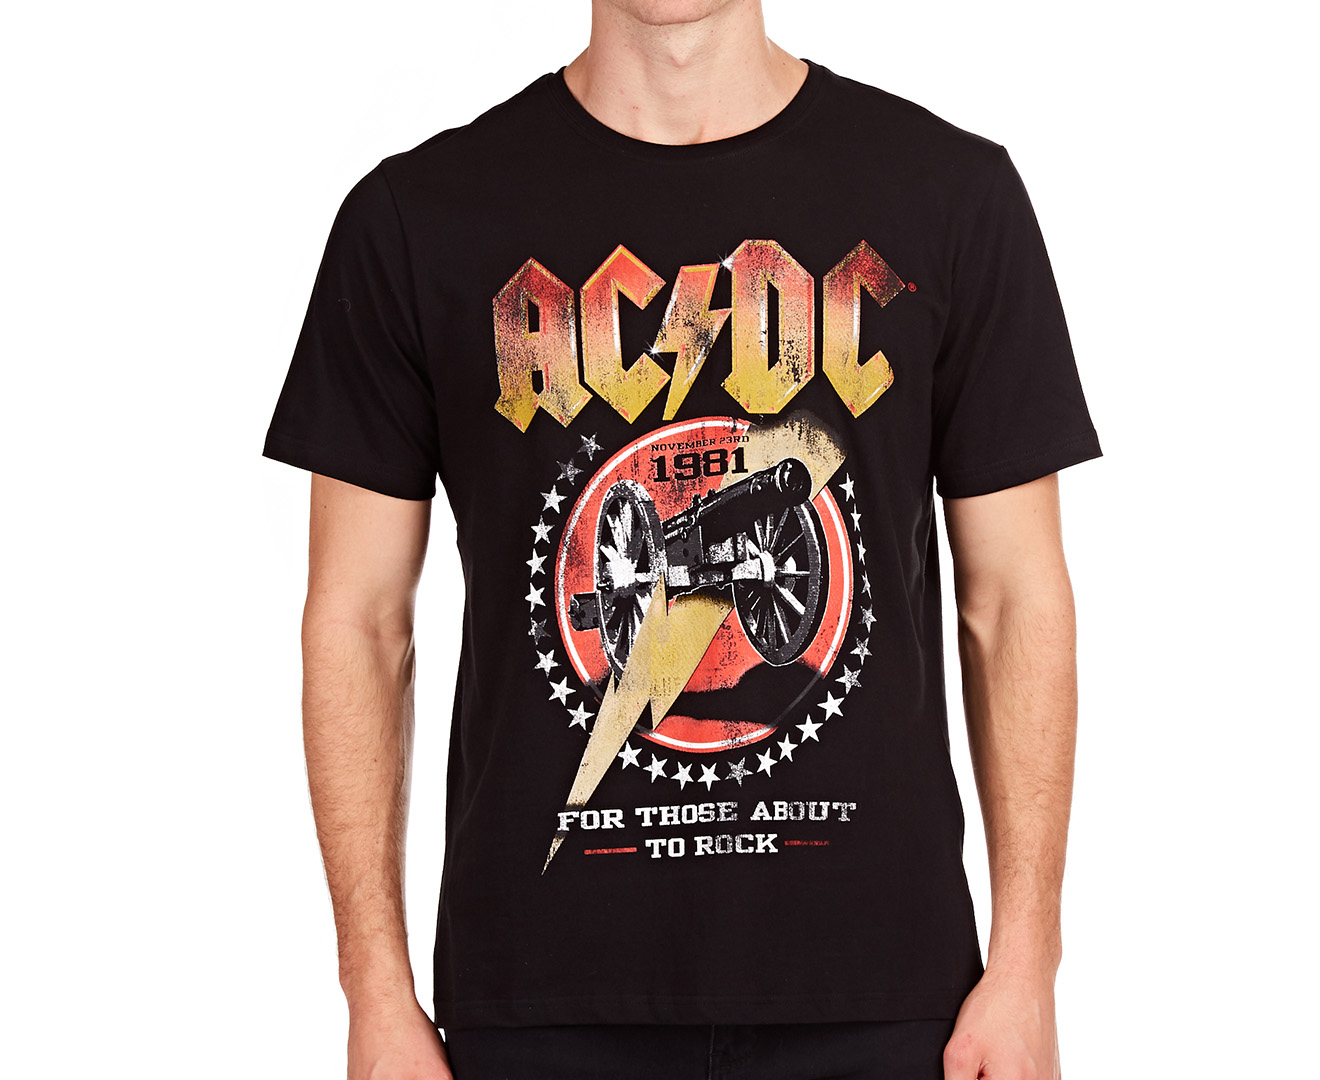 ACDC Men's For Those About To Rock Tee - Black | Catch.com.au